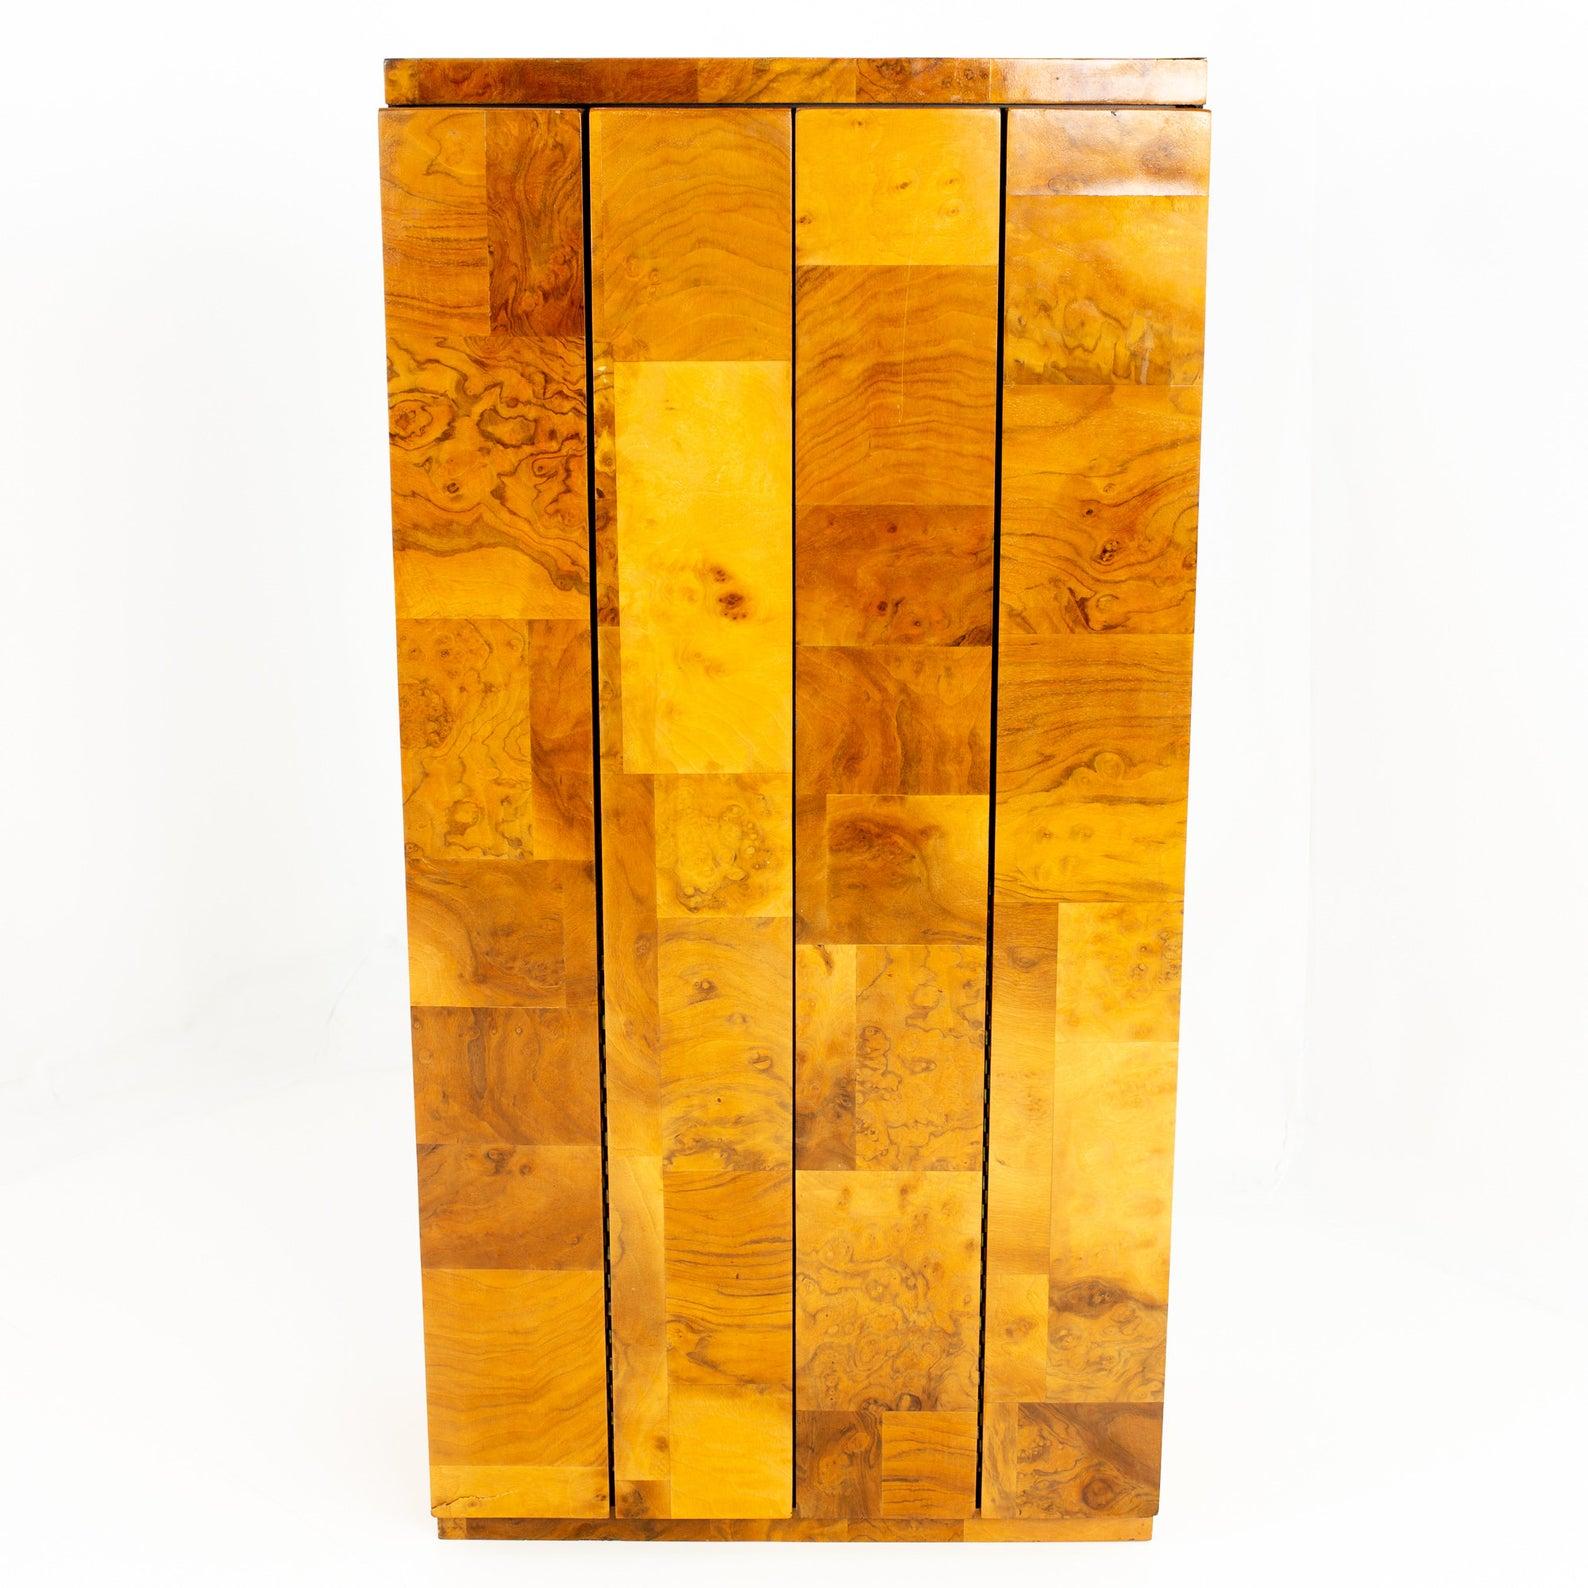 Paul Evans cityscape Mid Century burl wood floating display cabinet 
Measures: 24.5 wide x 13.75 deep x 48.25 inches high 

This price includes getting this piece in what we call restored vintage condition. That means the piece is permanently fixed